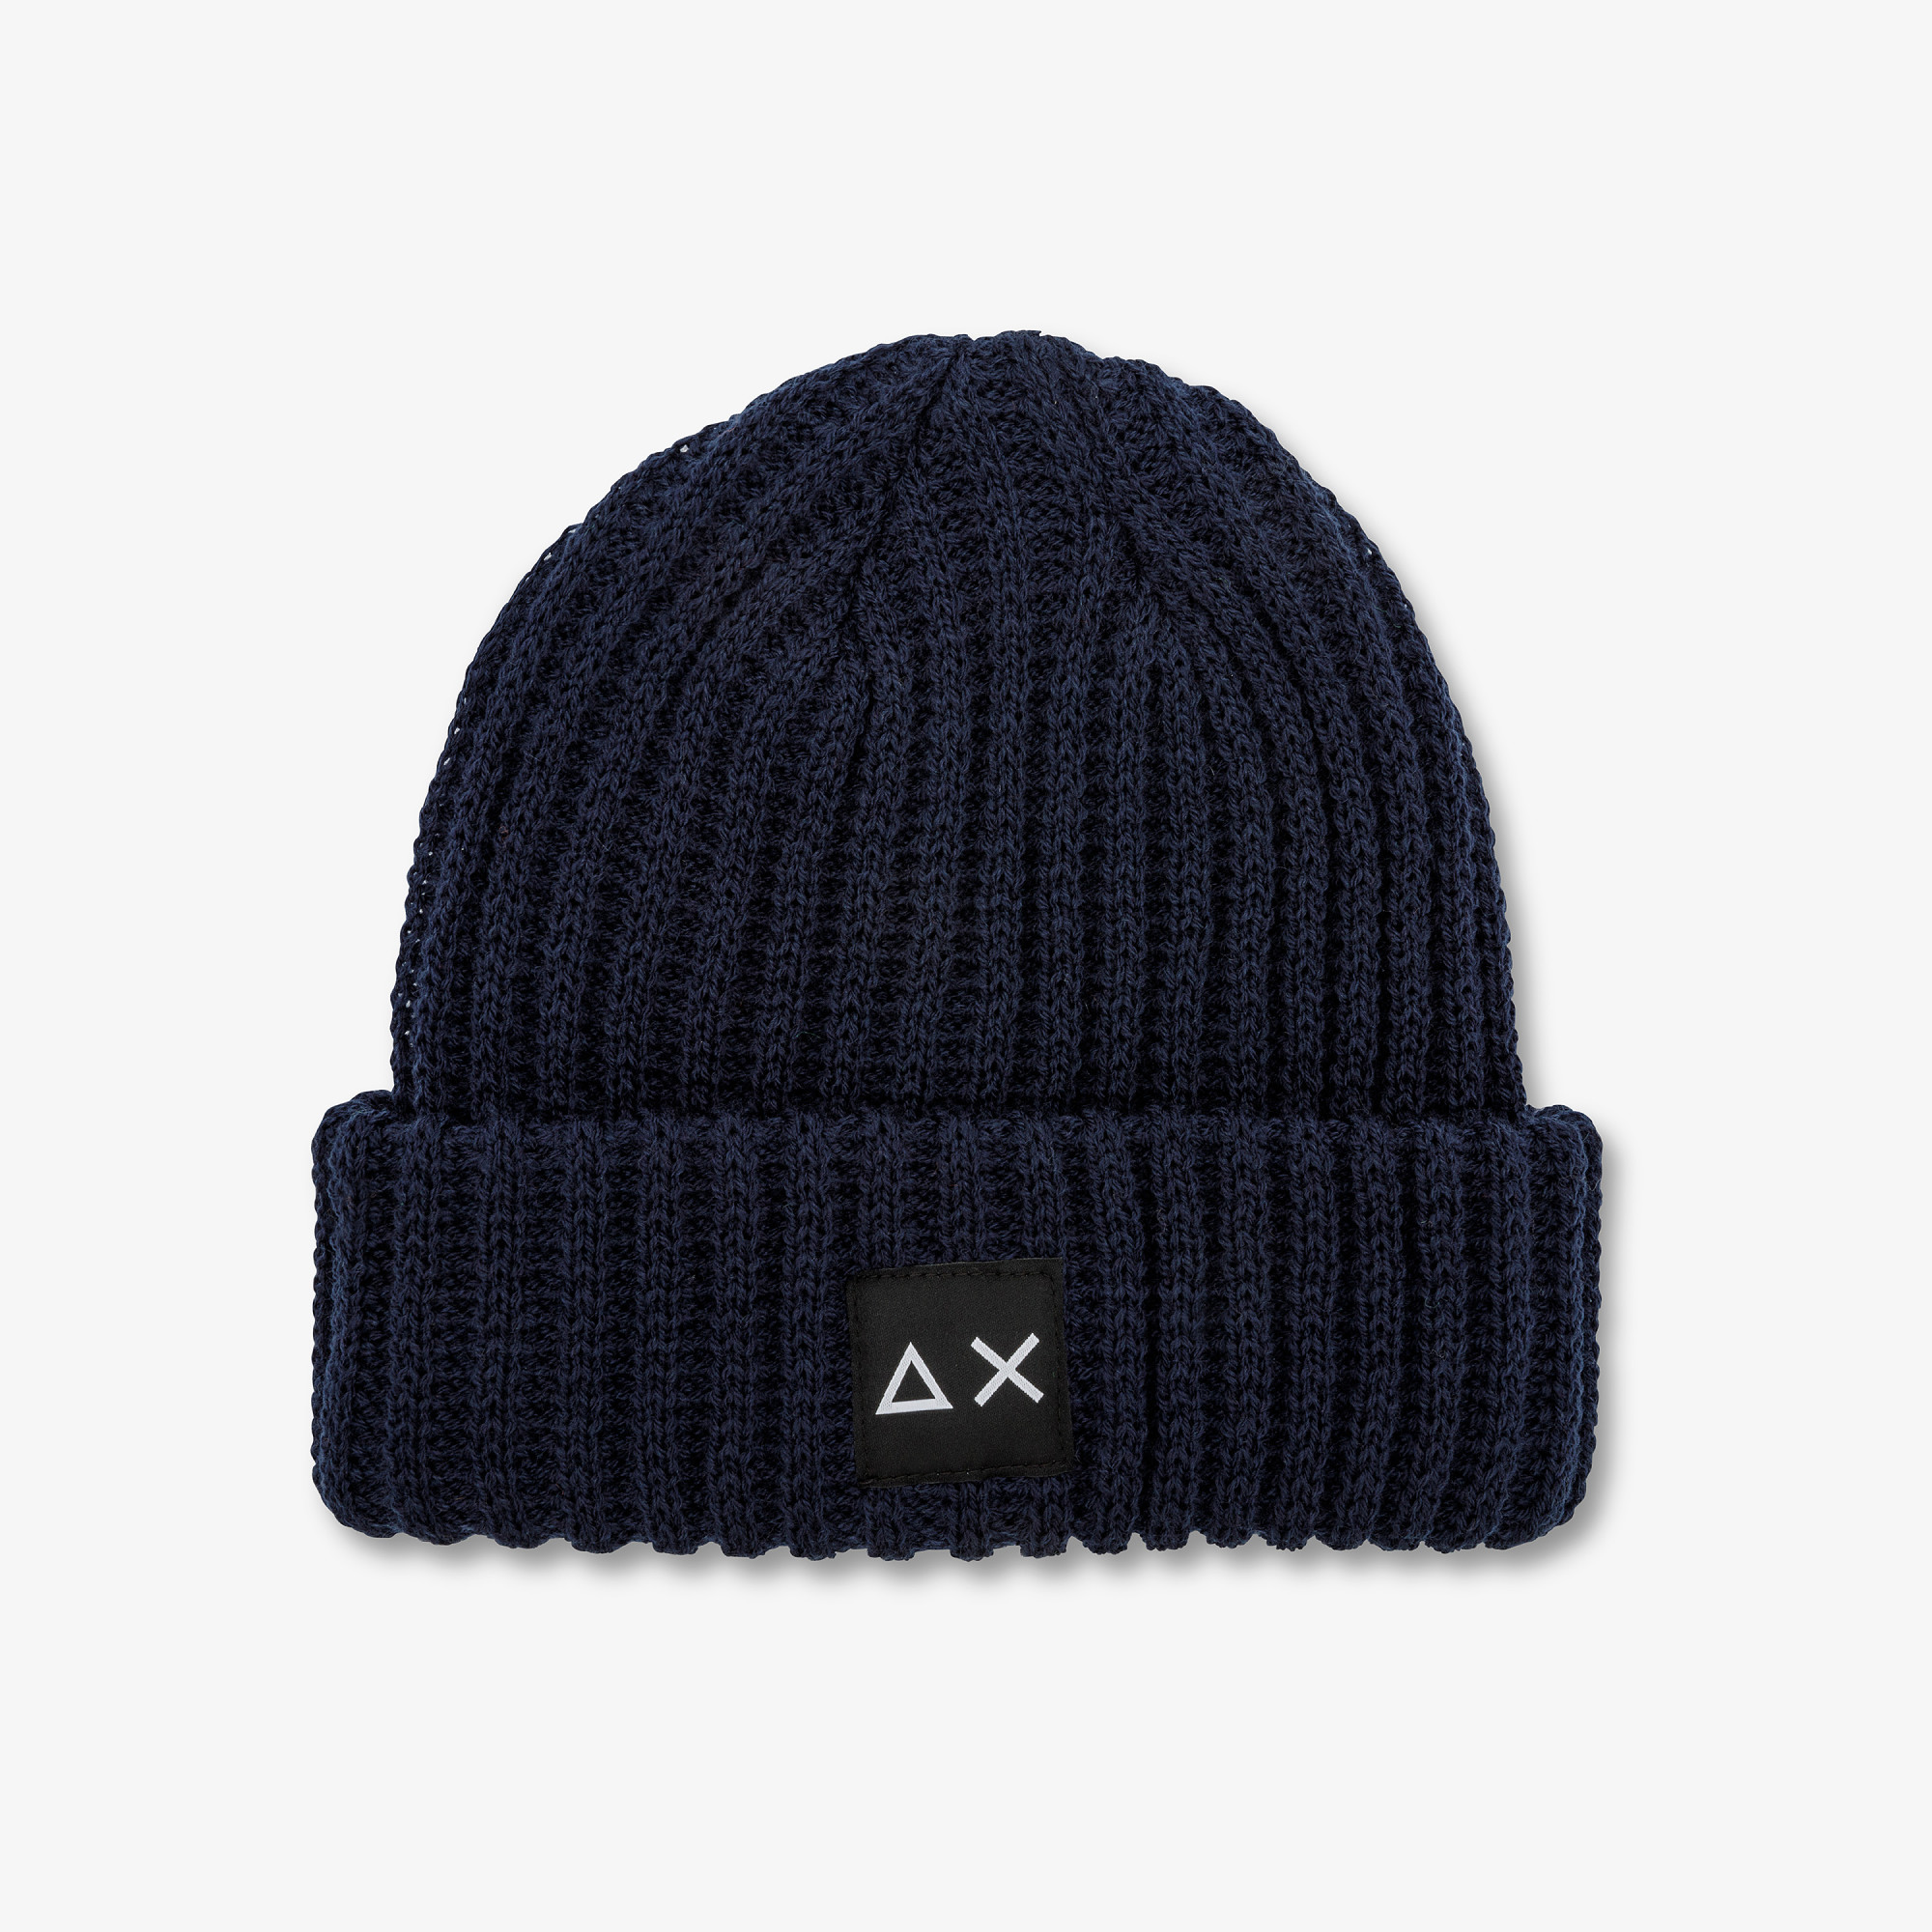 CAP THICK KNIT NAVY BLUE